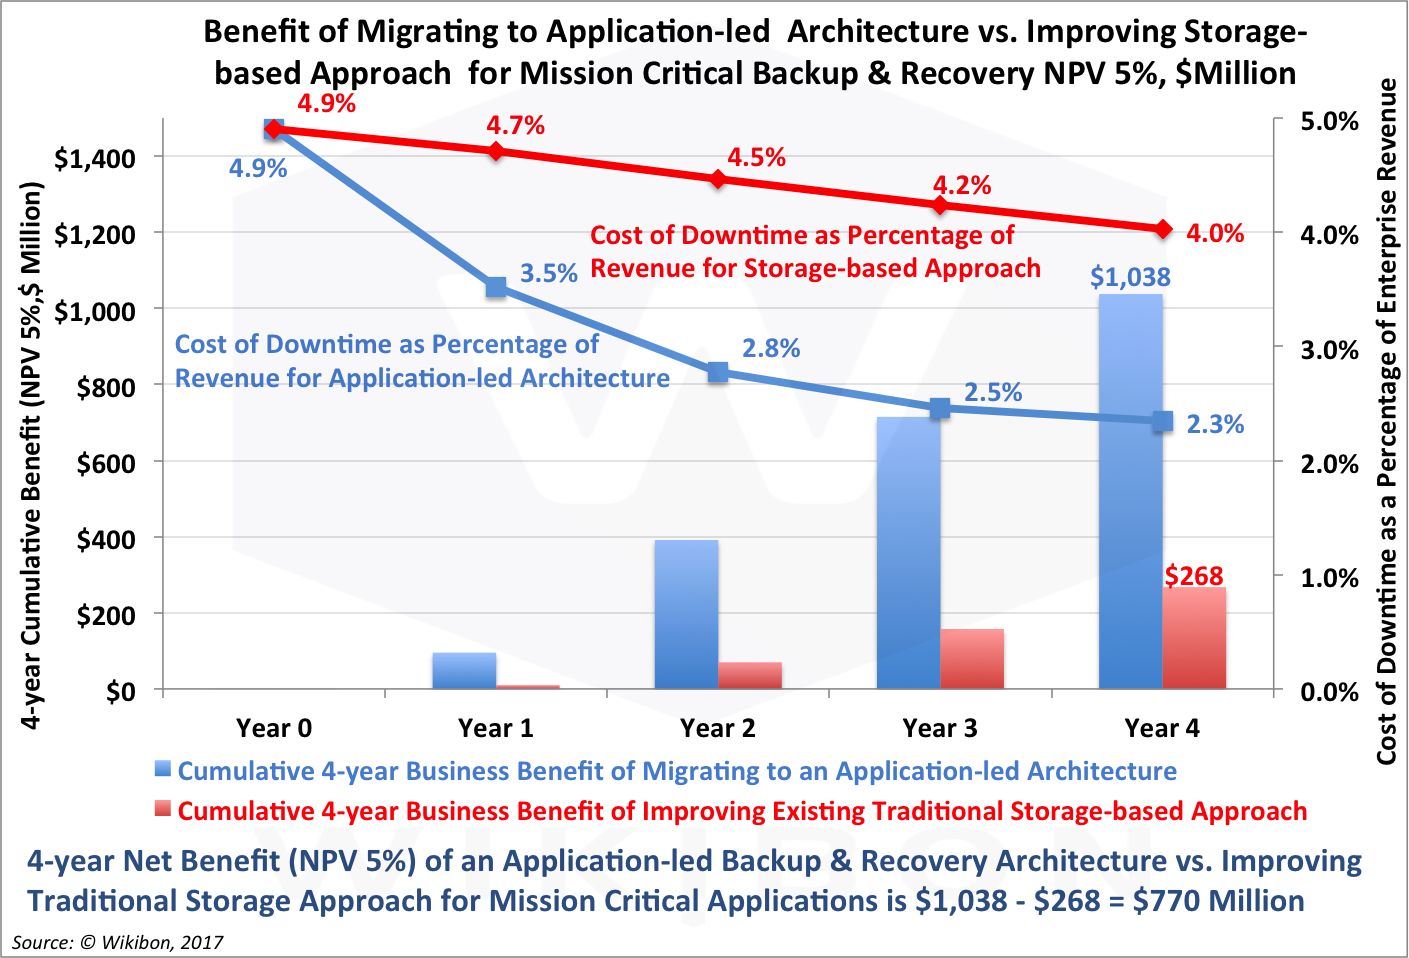 Comparison of Migration to Application-led Architecture with Upgrading existing Storage-based for Mission Critical Backup & Recovery